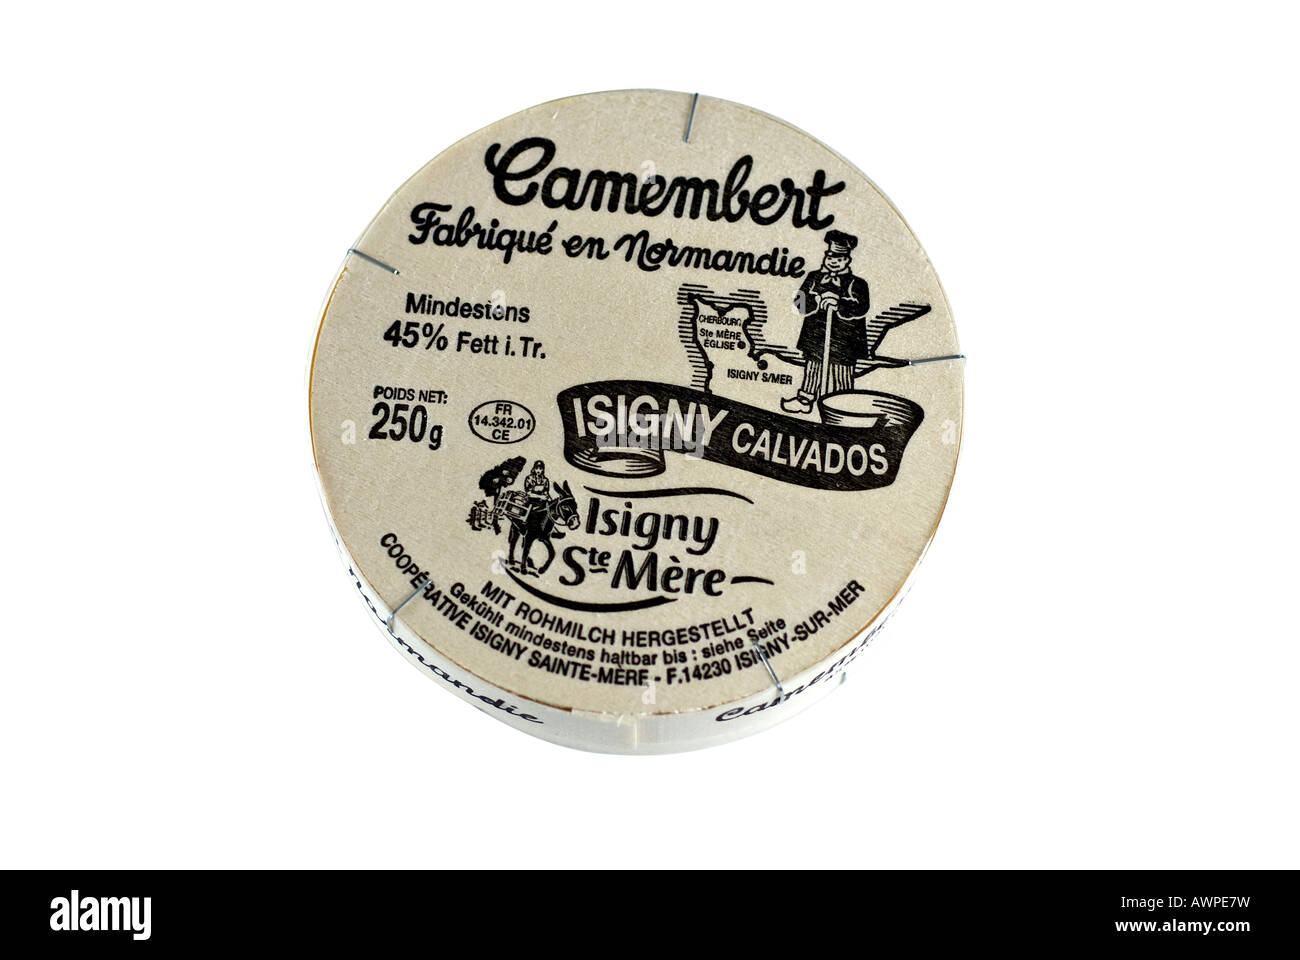 Authentic Camembert cheese made from unpasteurised milk, Normandy, France, Europe Stock Photo